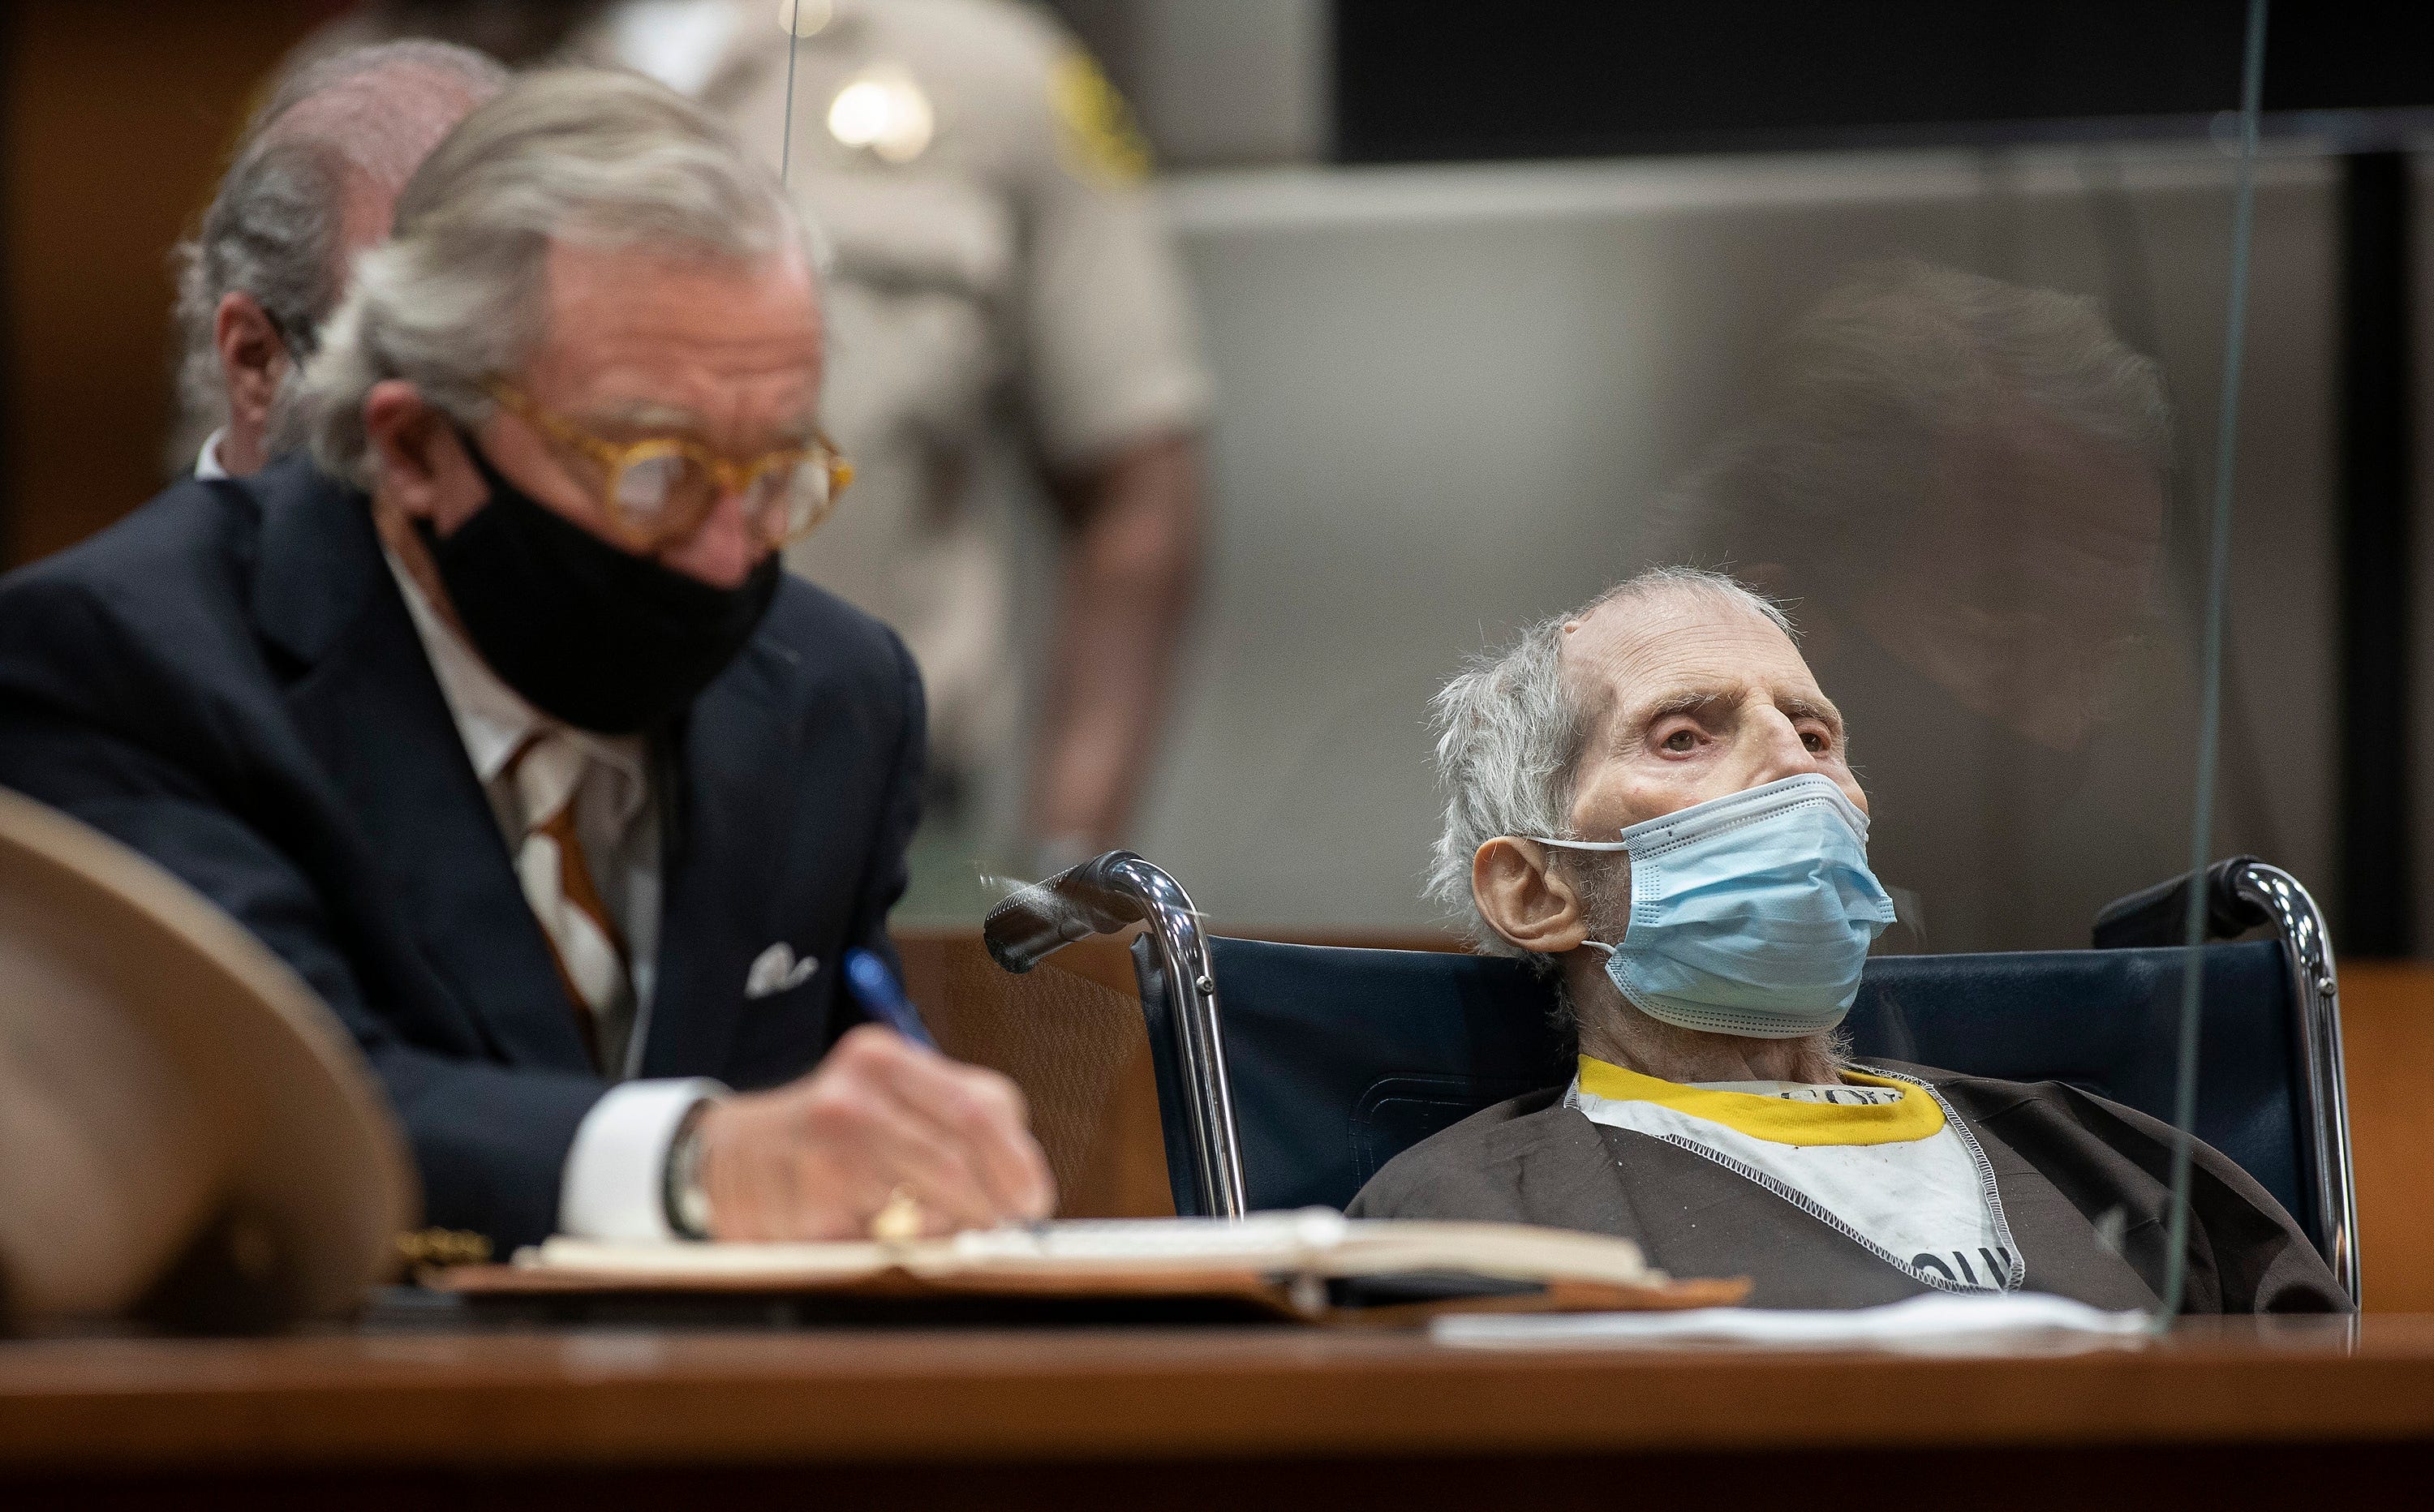 Robert Durst charged with murder in wife Kathie's 1982 disappearance